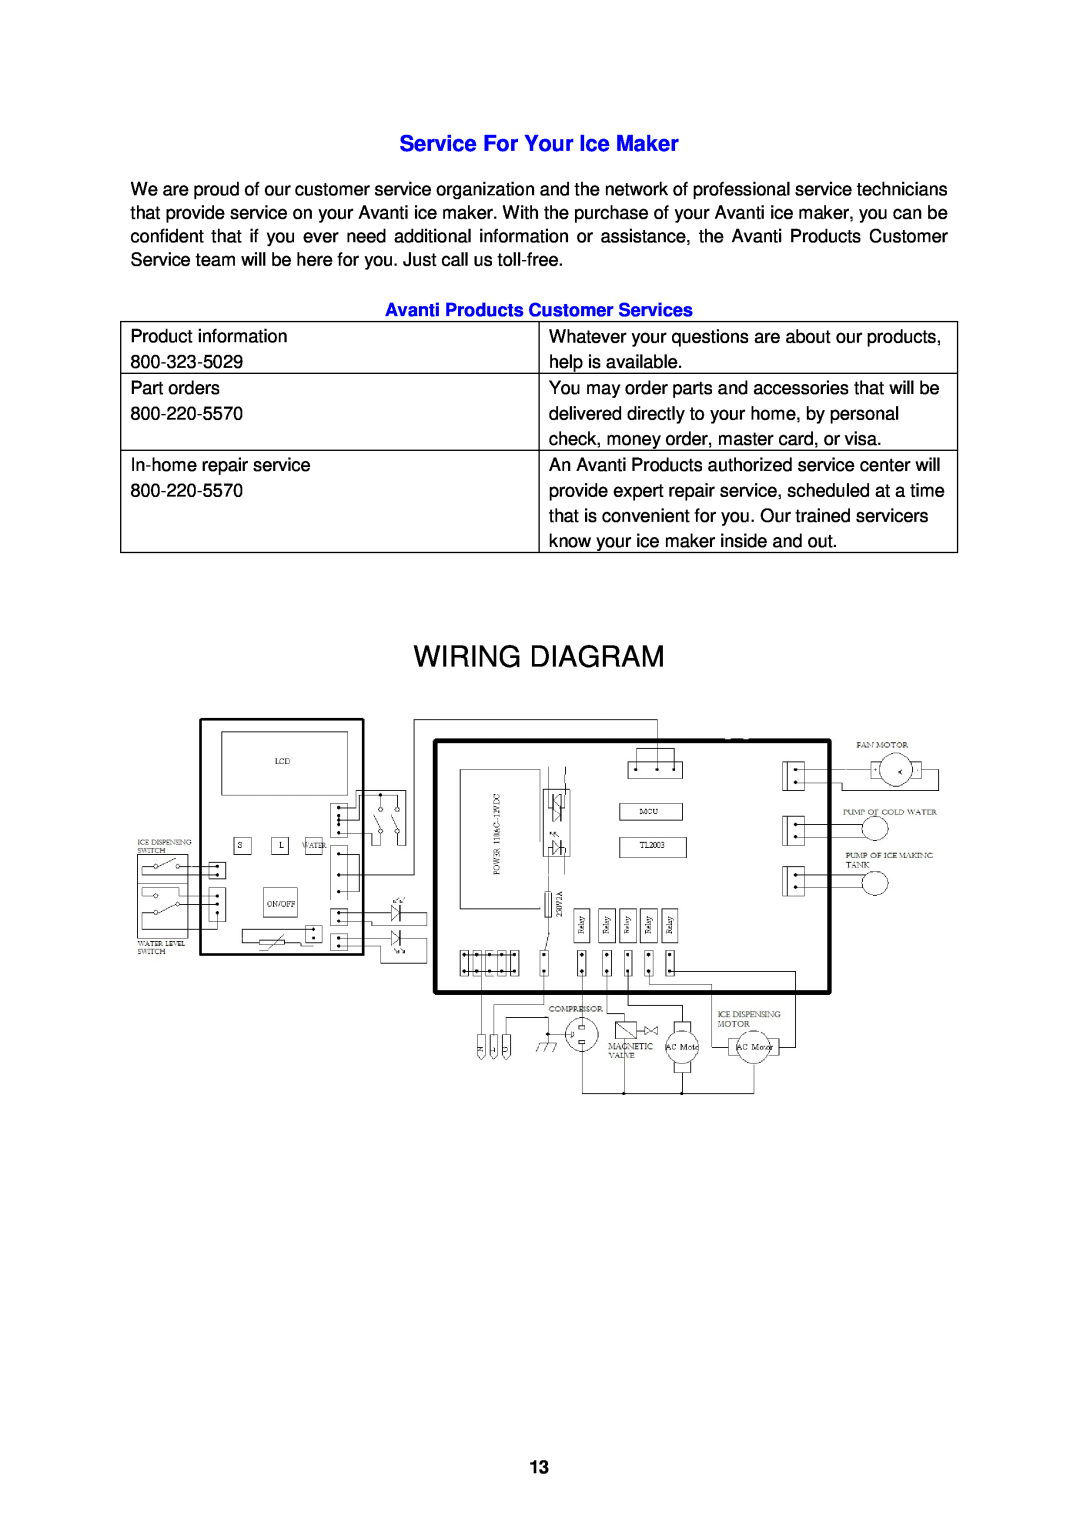 Avanti WIMD332PC-IS instruction manual Service For Your Ice Maker, Wiring Diagram, Avanti Products Customer Services 